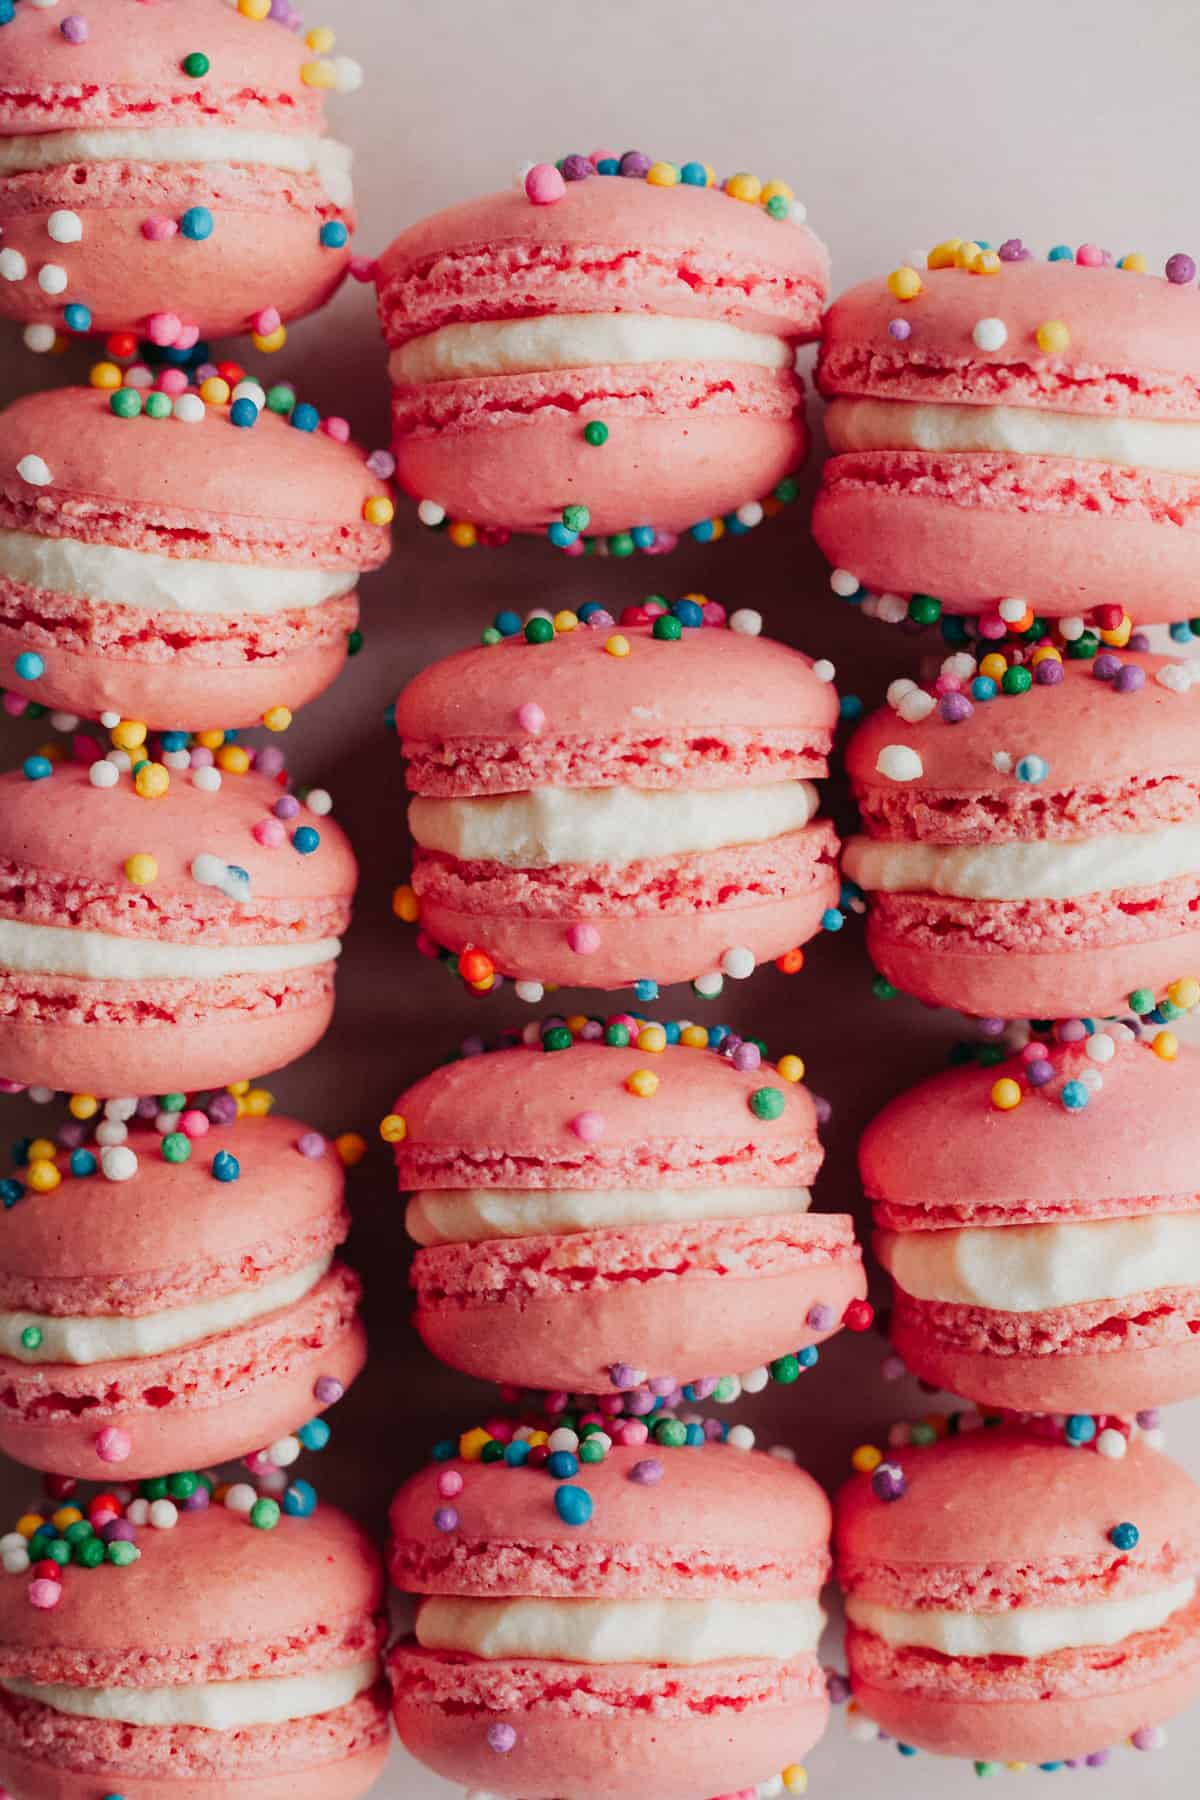 Rows of birthday macarons sprinkled with nonpareil sprinkles, and filled with a white buttercream